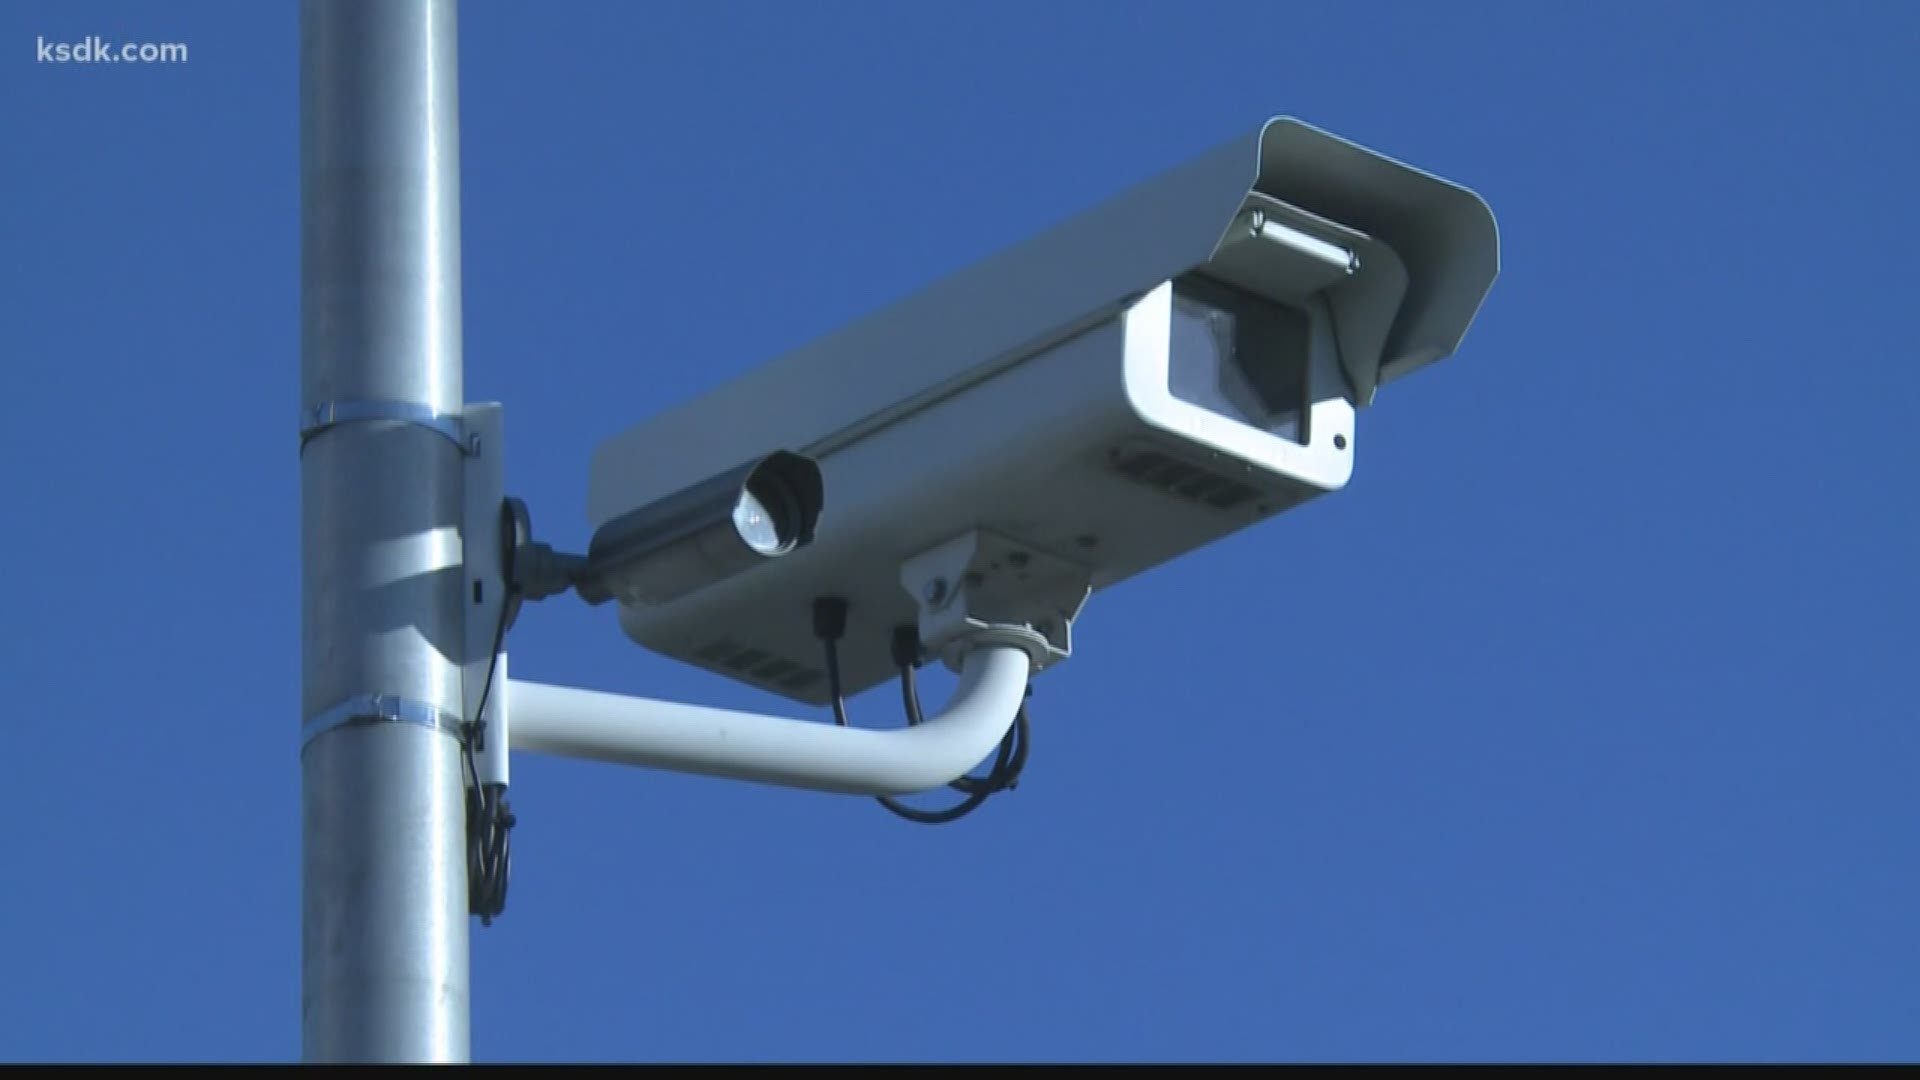 On Tuesday, the St. Louis County Council will move forward with an idea to ban red-light cameras anywhere in the county.